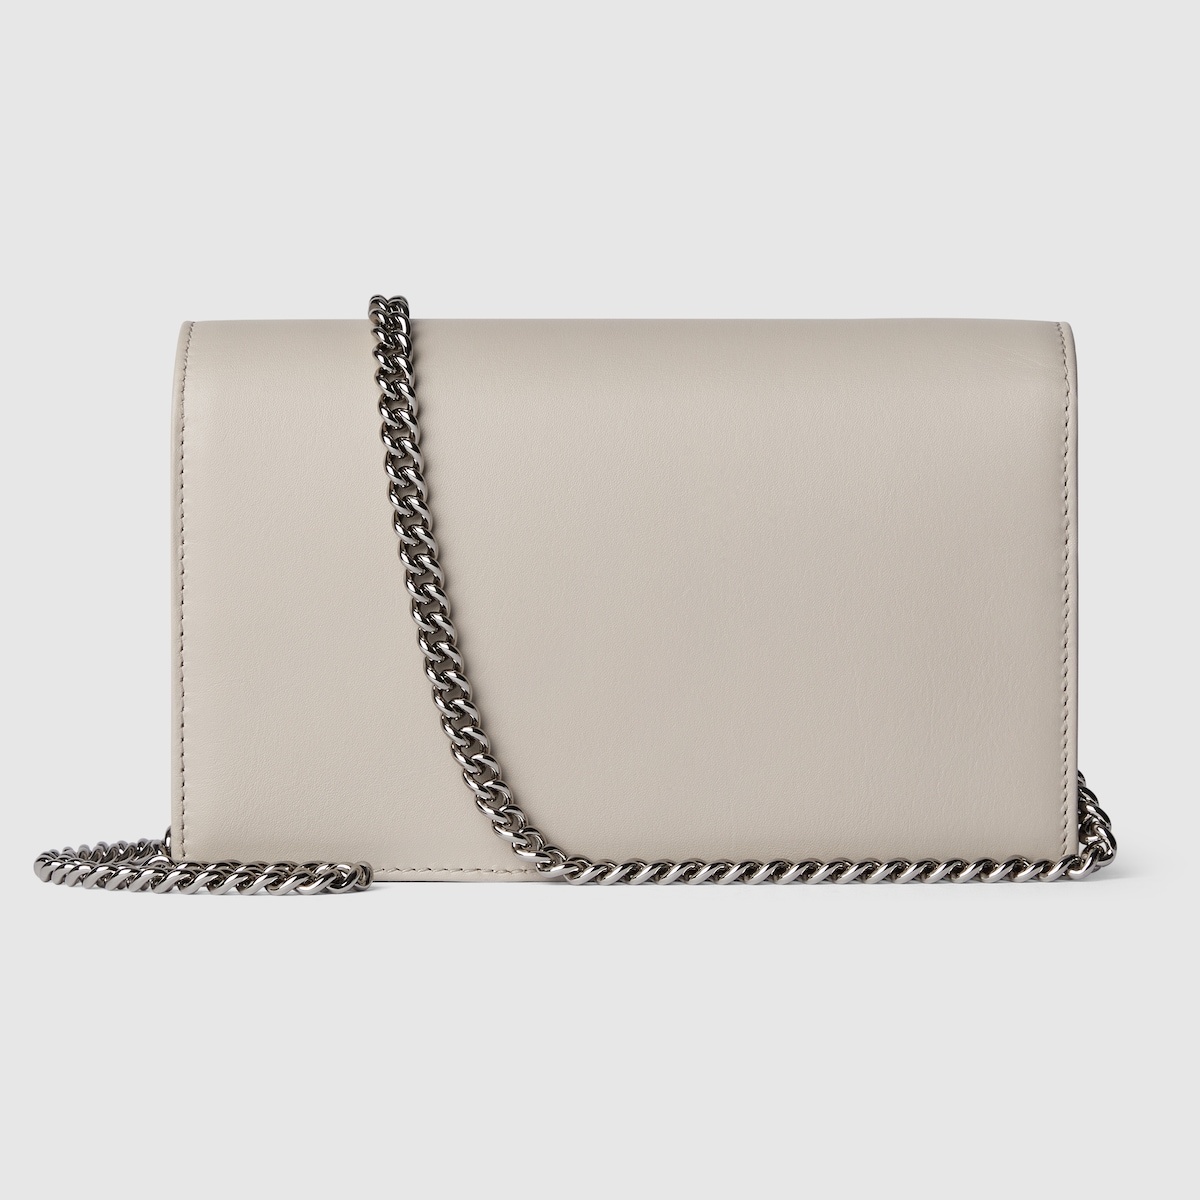 GG Marmont chain wallet - 5